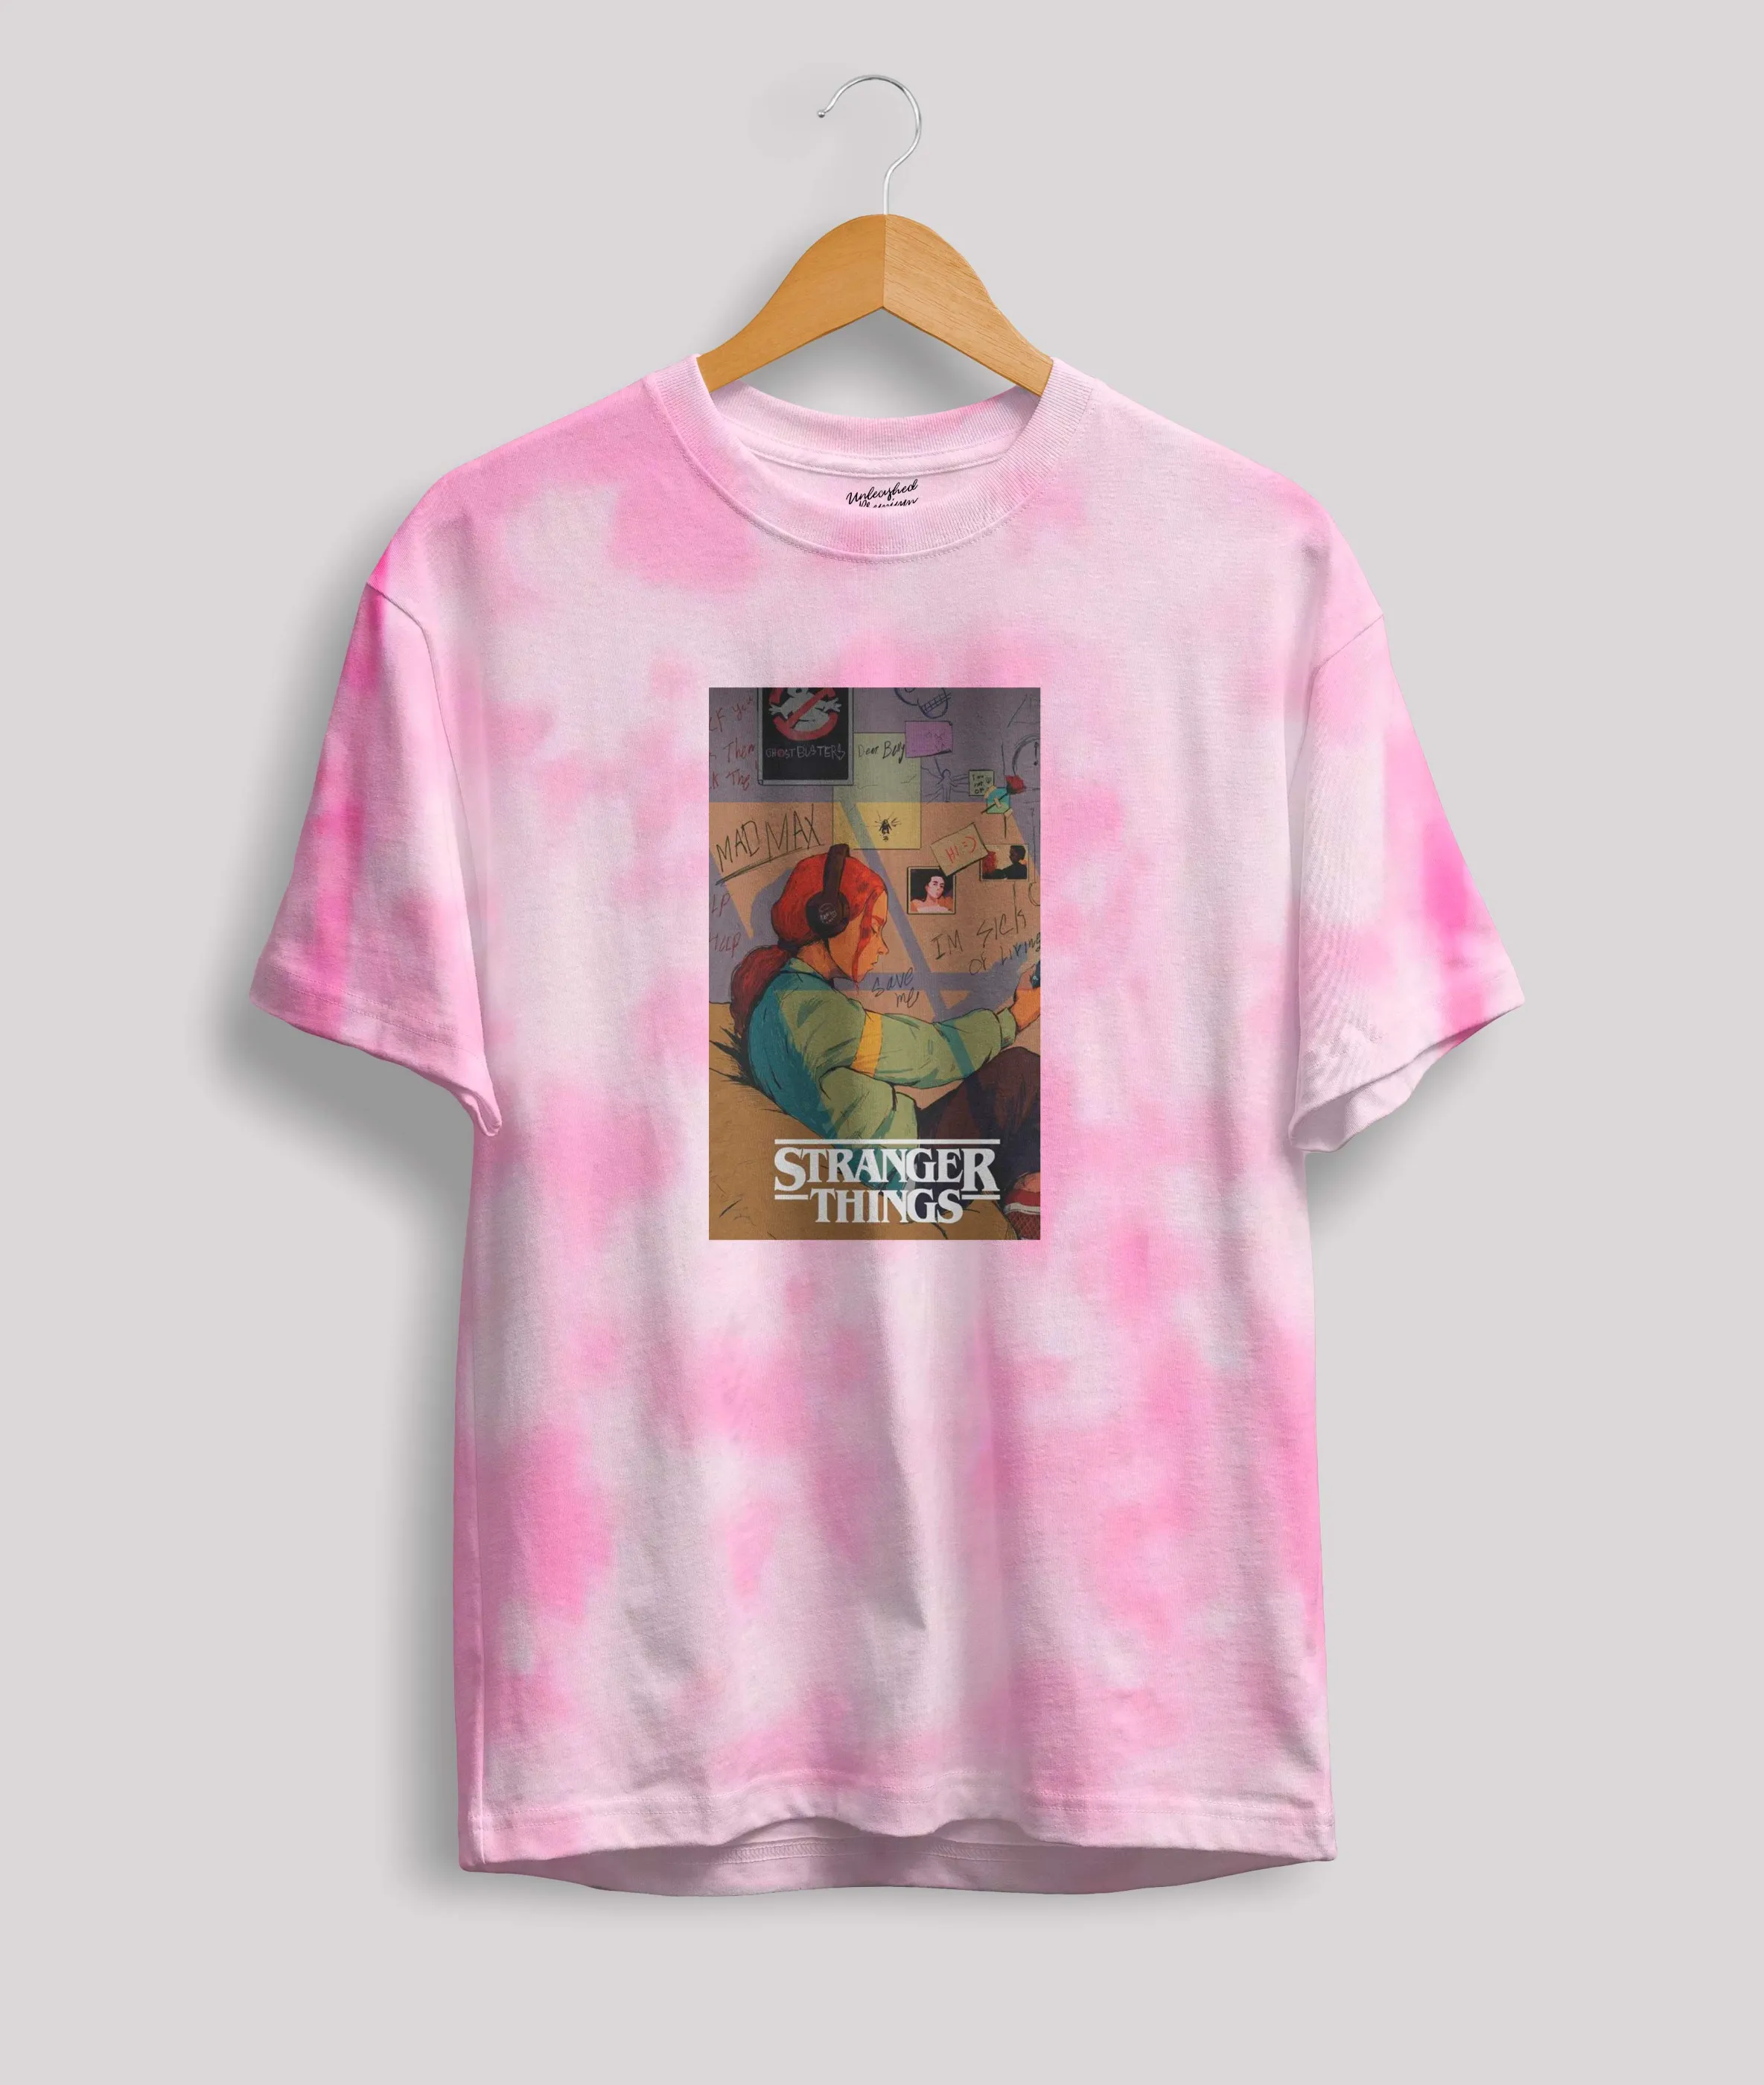 Stranger Things max mayfield music t-shirt